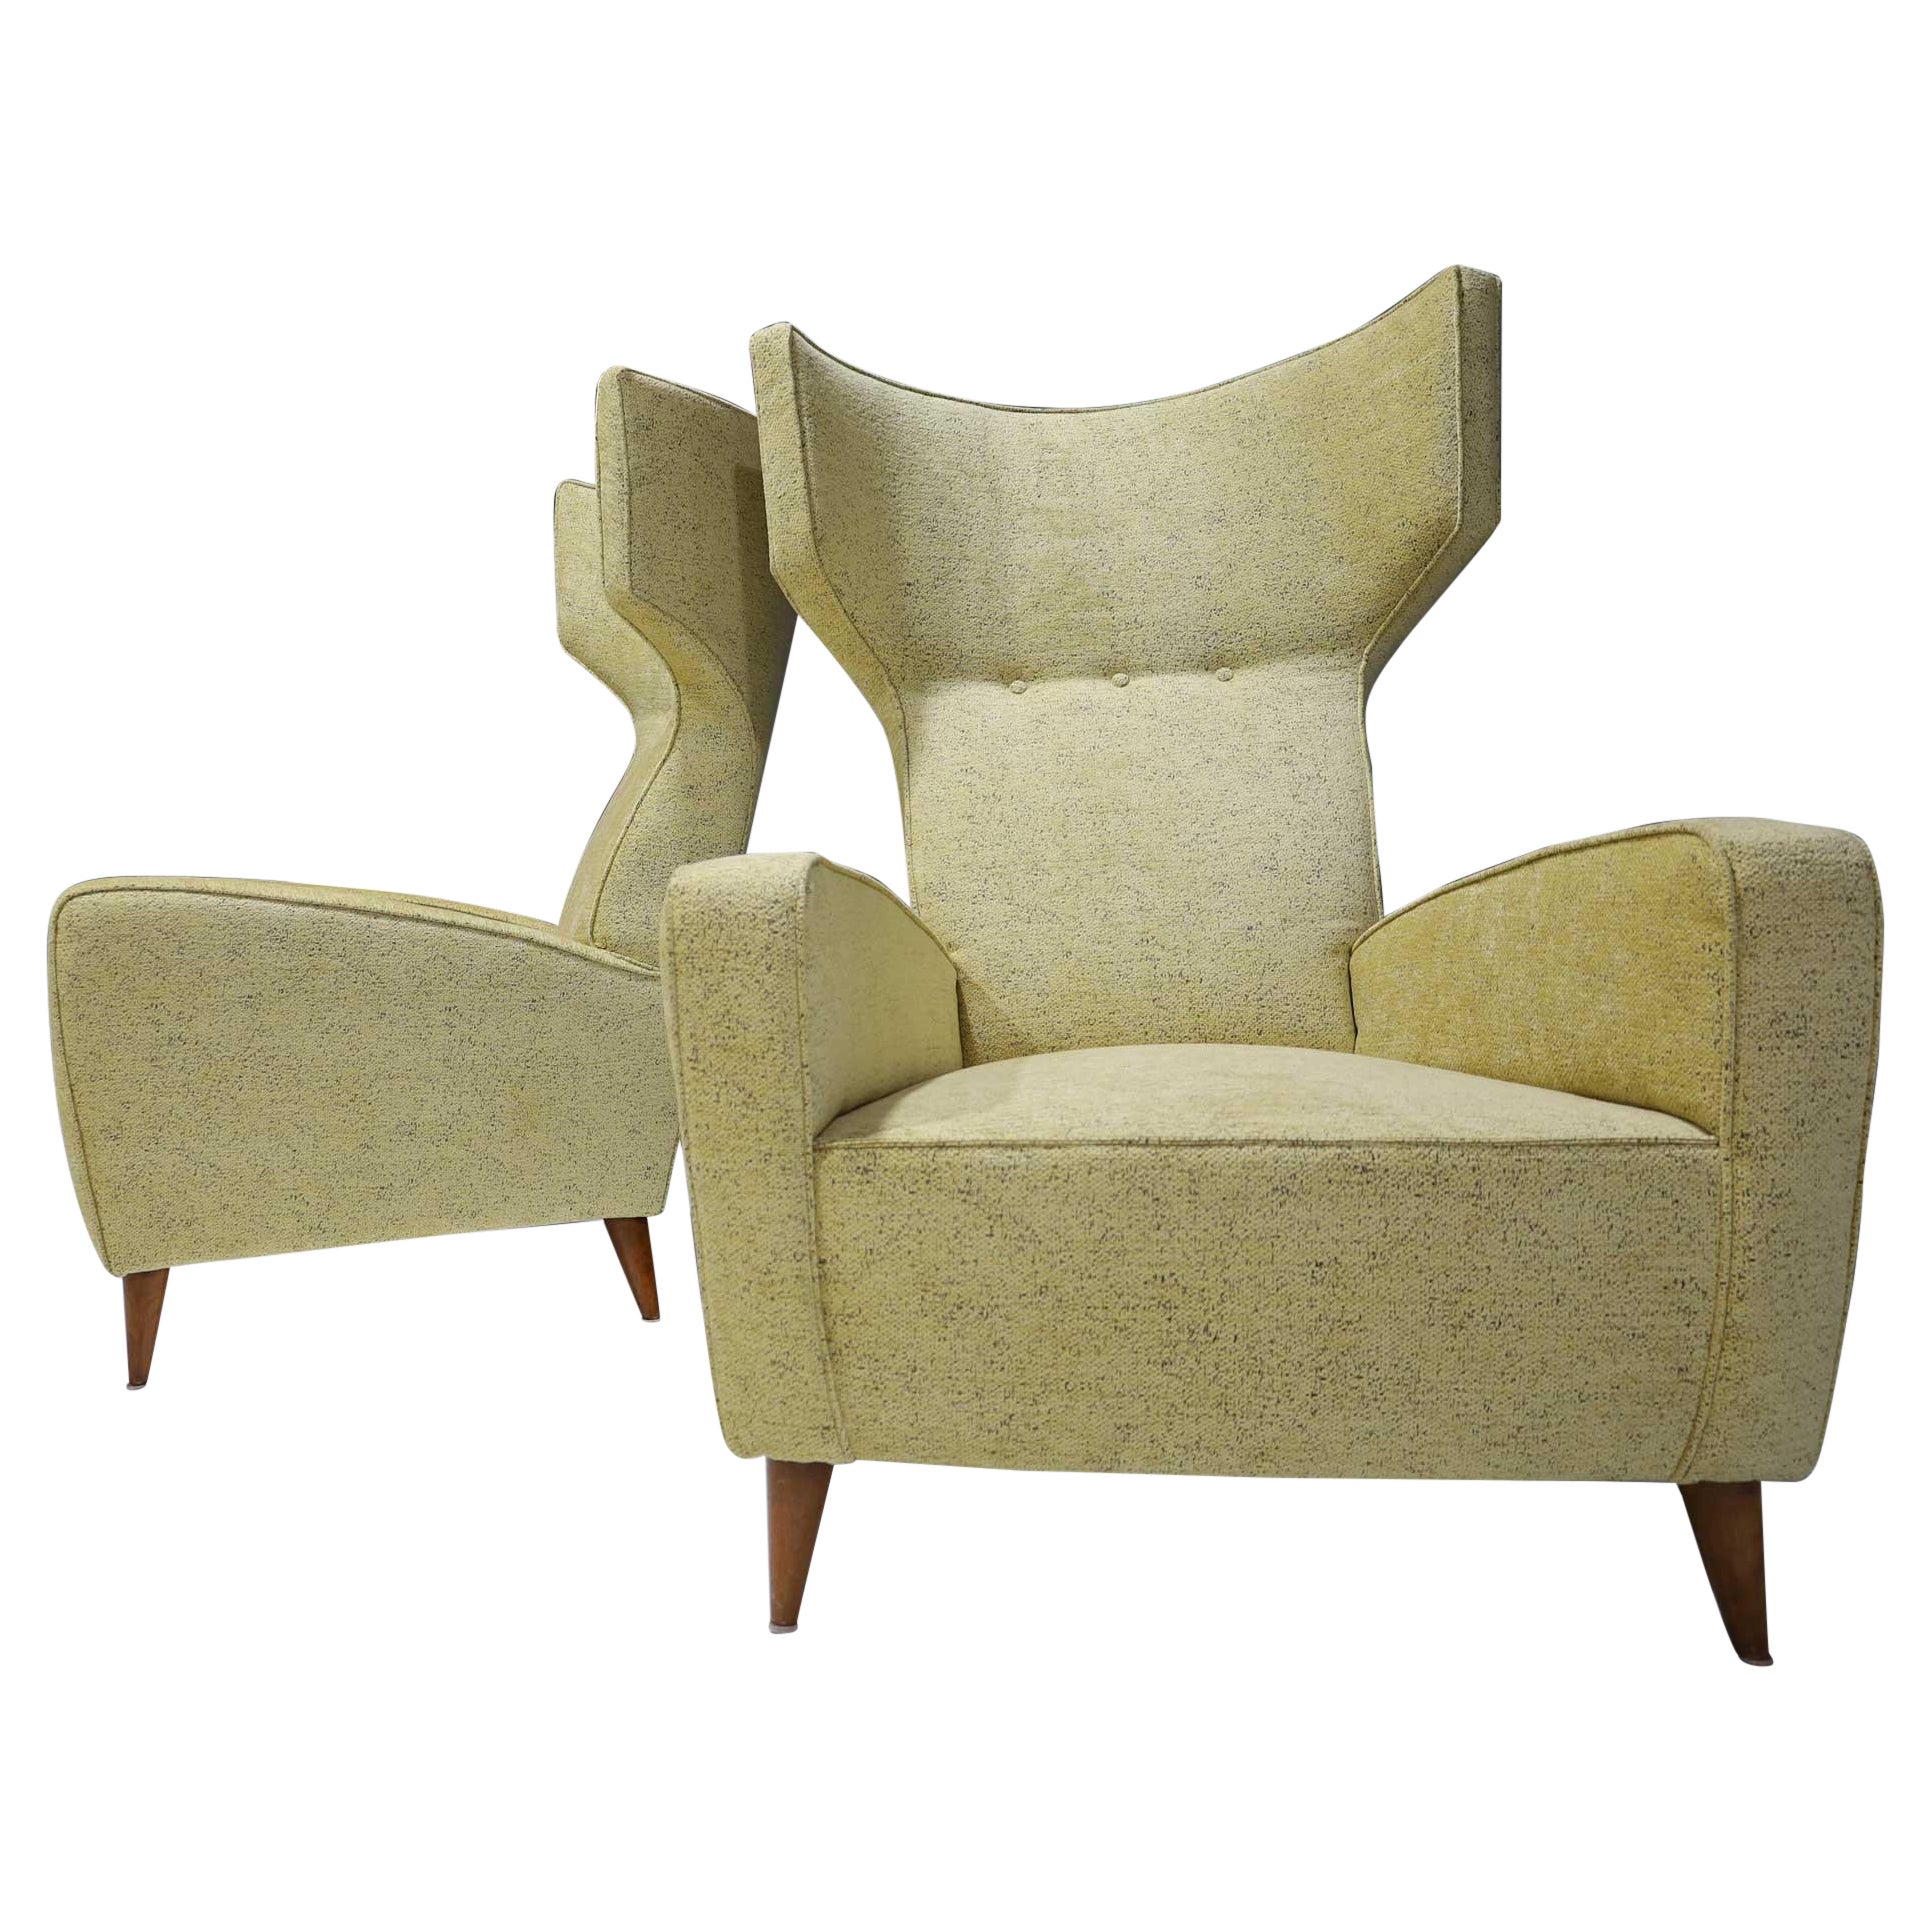 Fabulous Pair of Italian High Back Wing Chairs